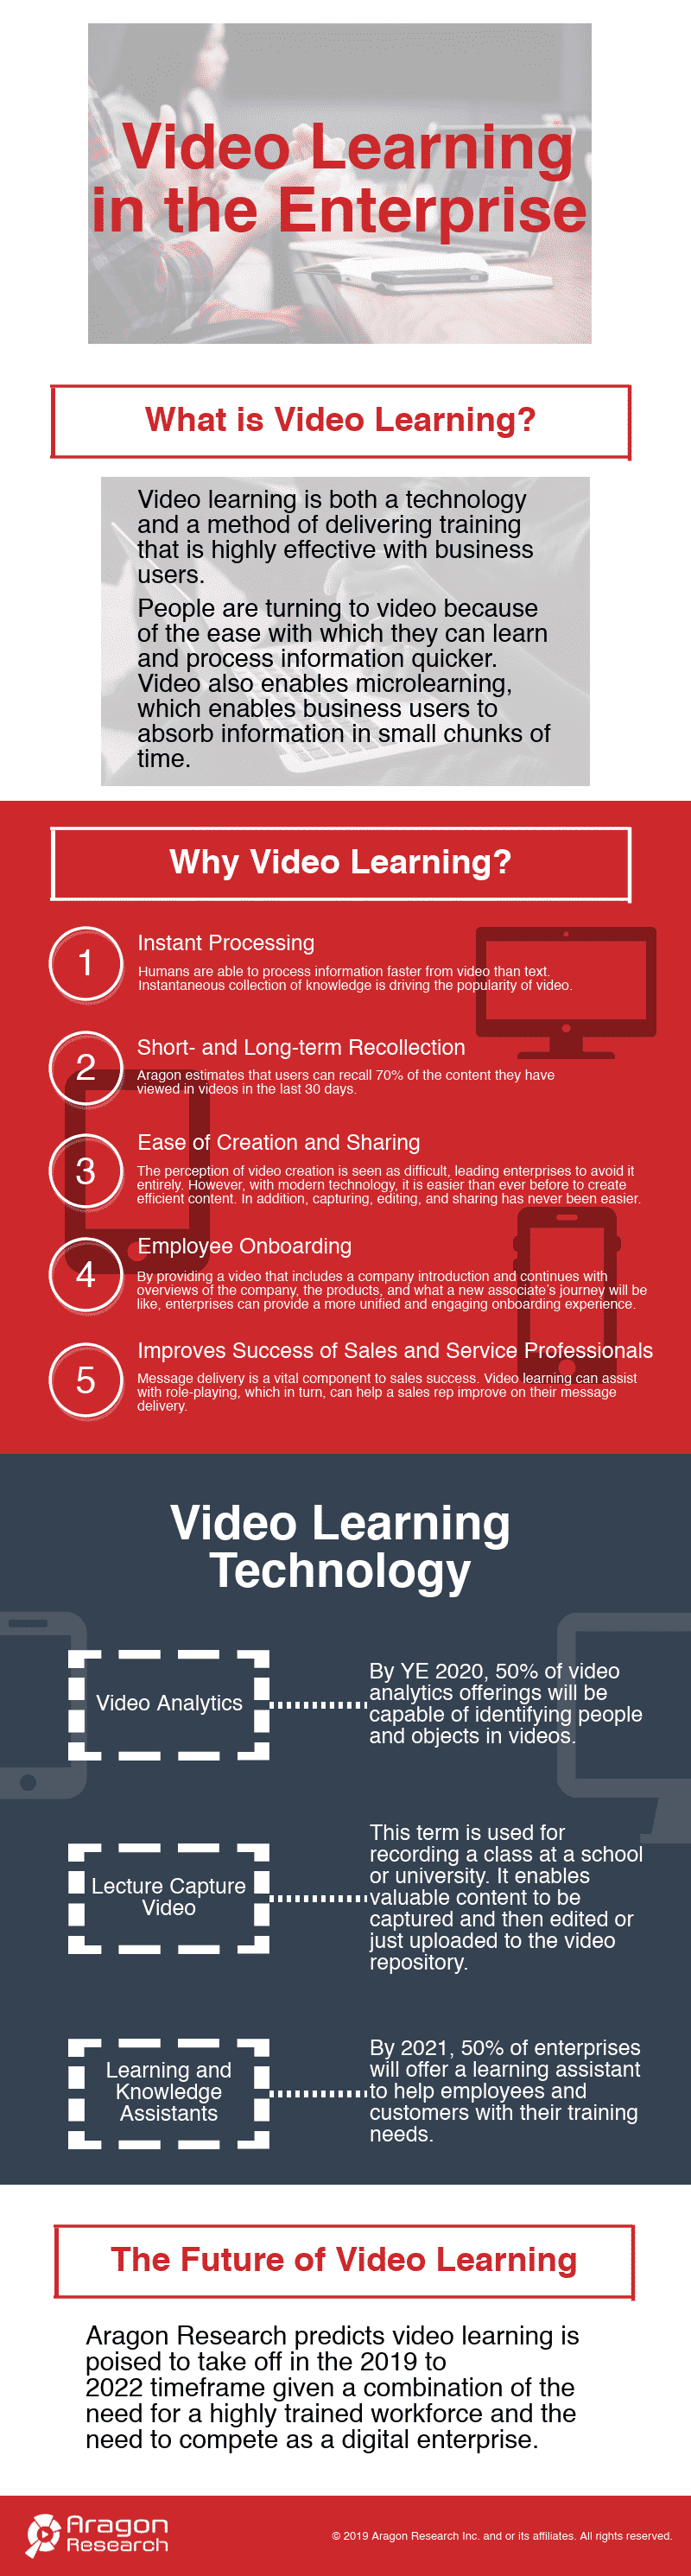 Video Learning in the Enterprise